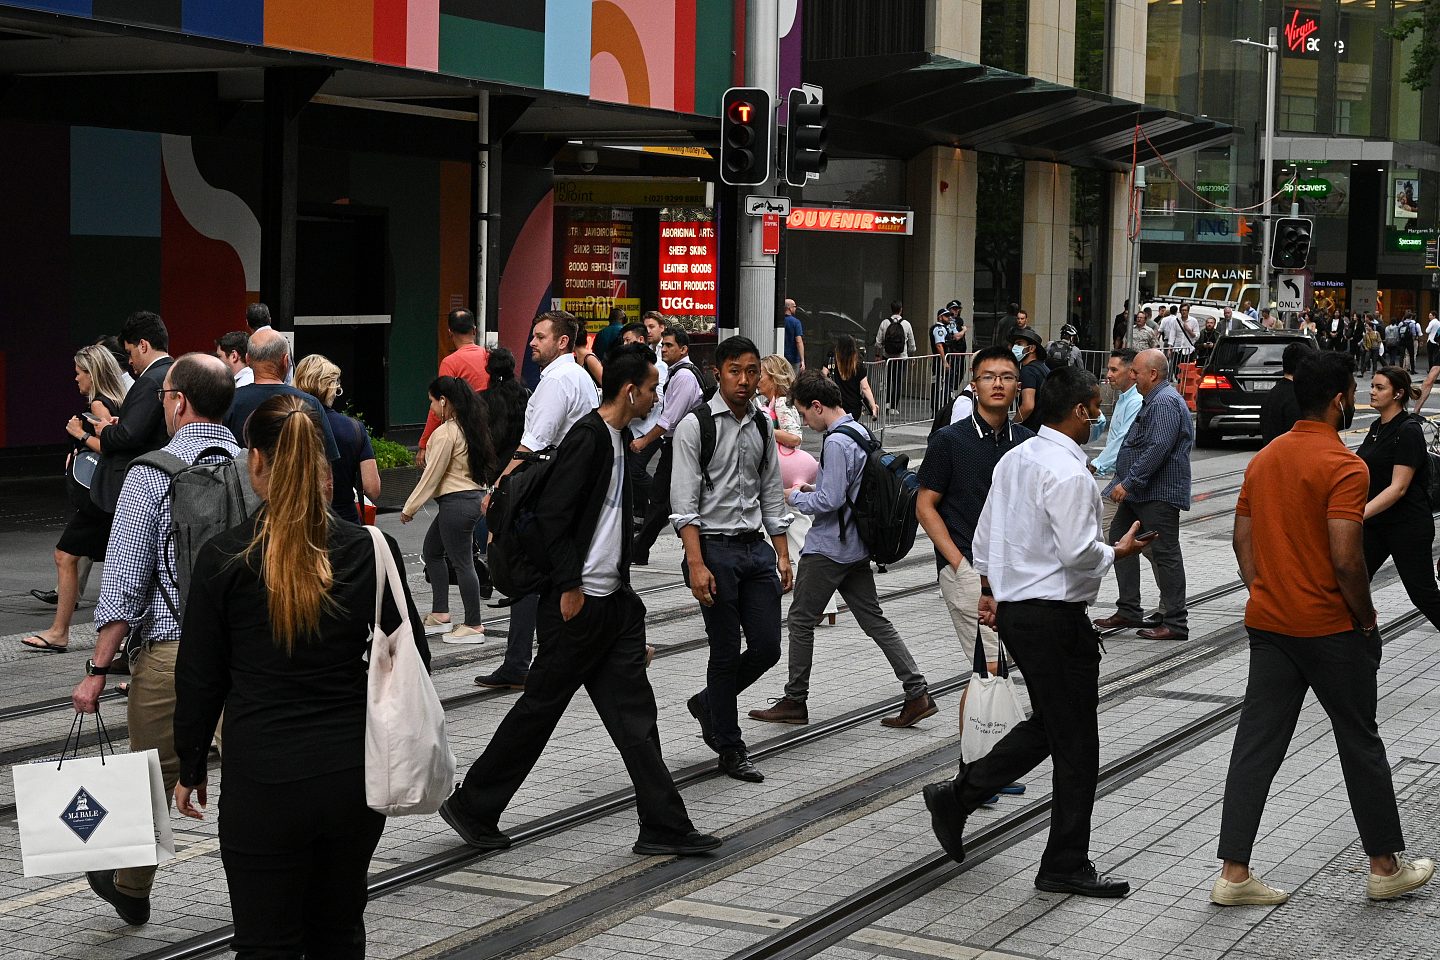 People cross a street in the city centre in Sydney